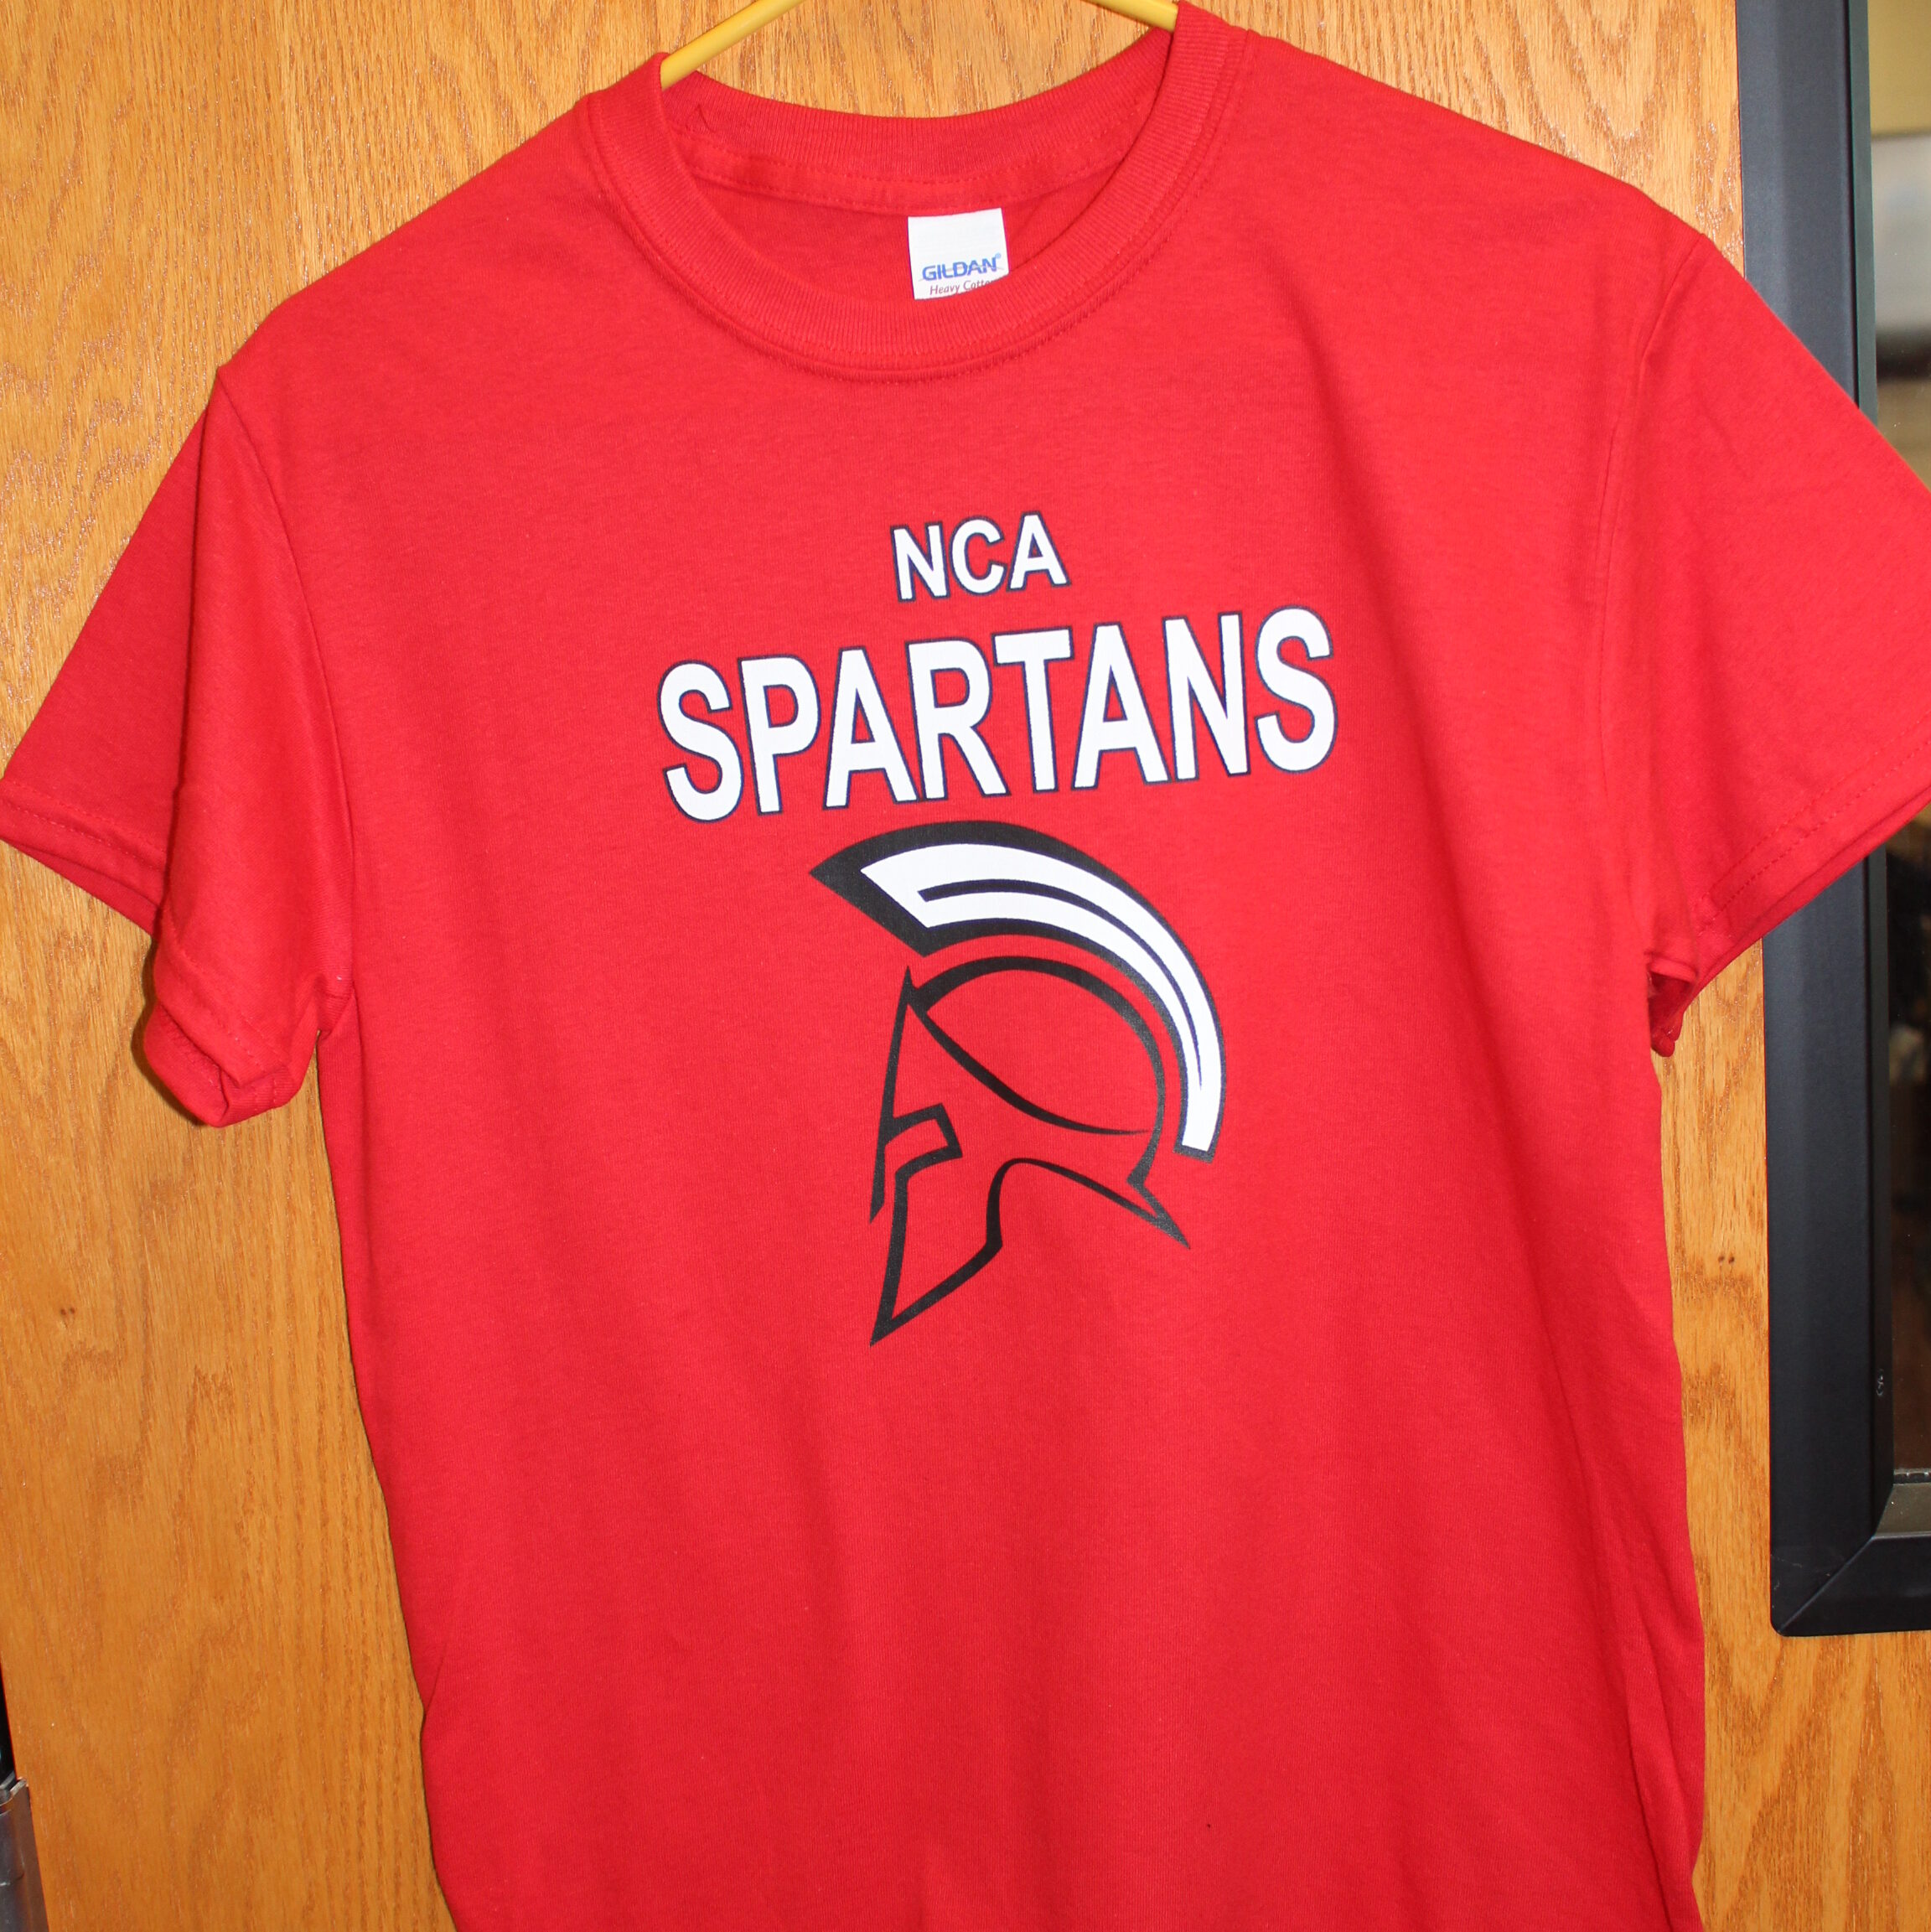 Red short sleeve t-shirt with the New Century Academy mascot on it